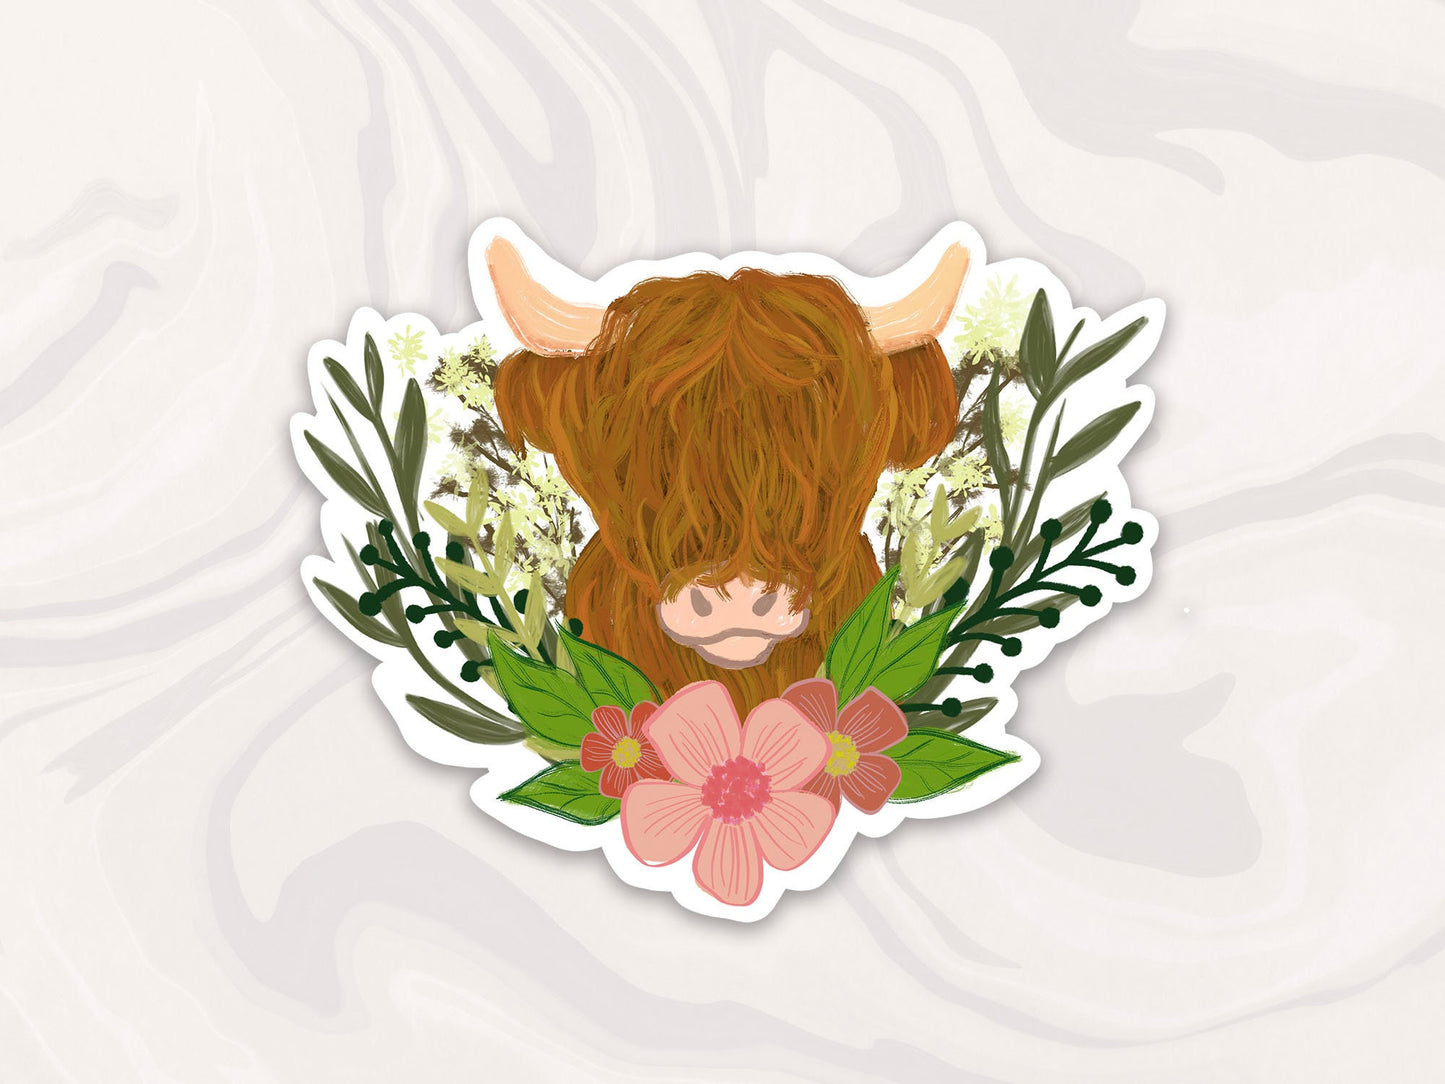 Highland Cow Flower Sticker, Highland Cow Animal Decal, Cow Gift, Cow Accessories, Gift for Cow Lover, Cool Cow Sticker, Gift